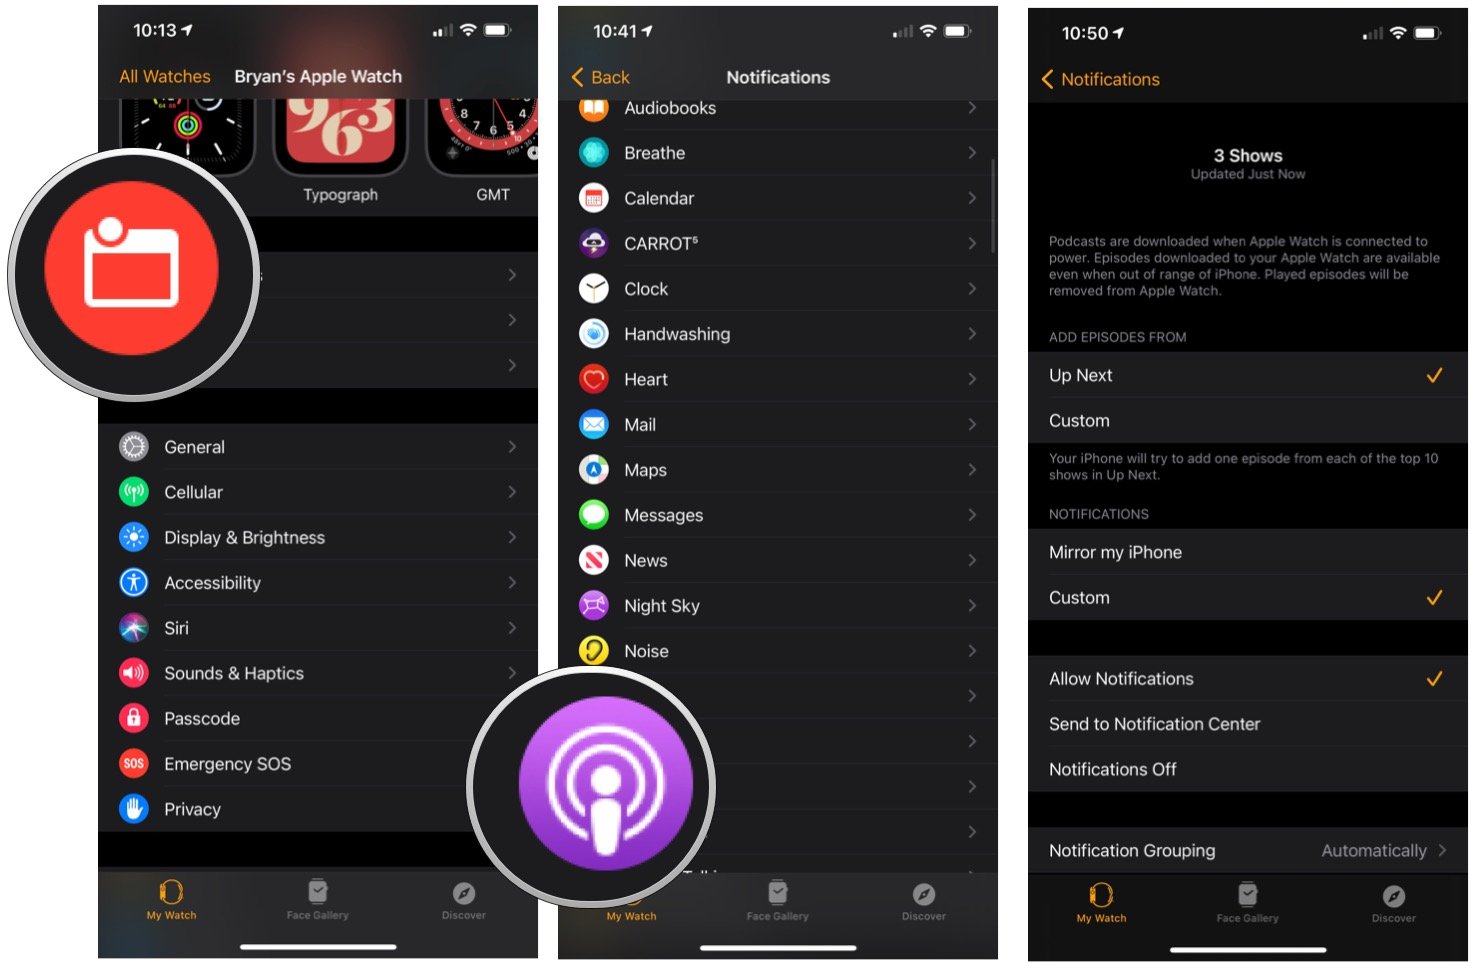 To customize Podcast  notifications, launch the Apple Watch app, tap Notifications, select Podcasts, then Custom.